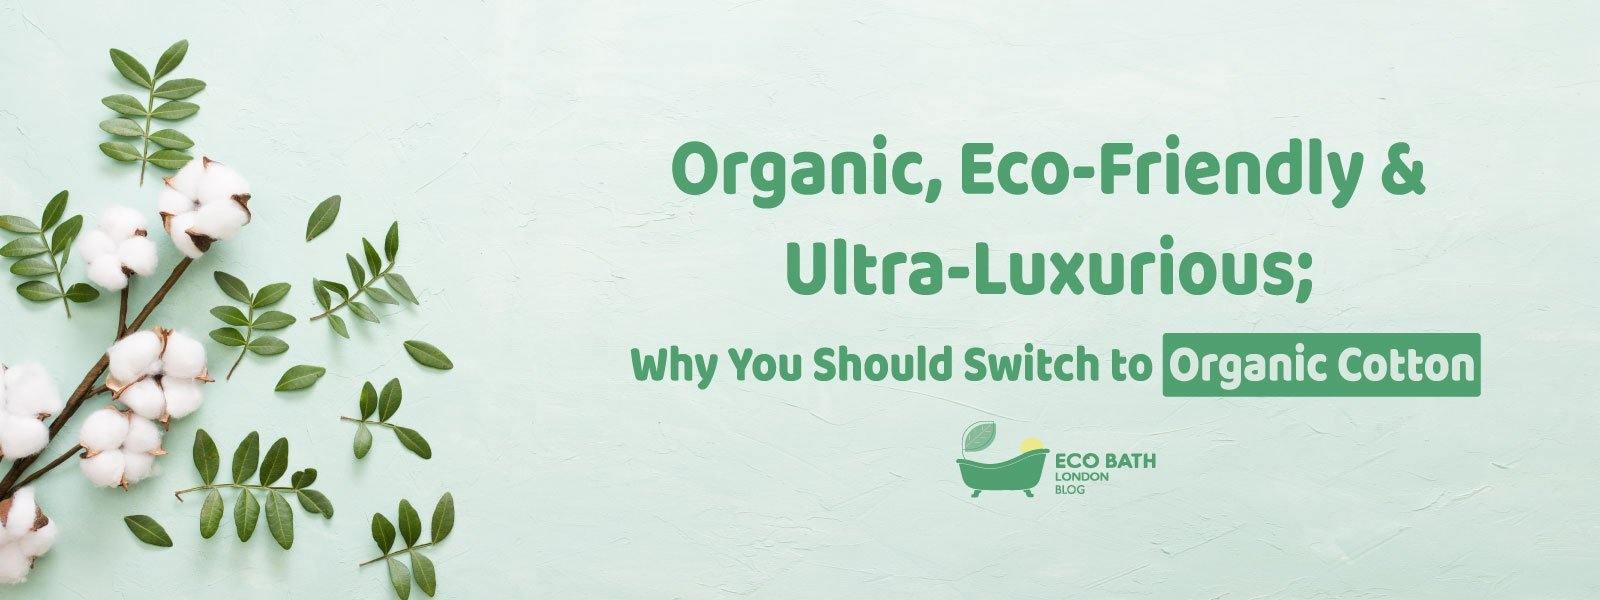 Organic, Eco-Friendly & Ultra-Luxurious; Why You Should Switch to Organic Cotton